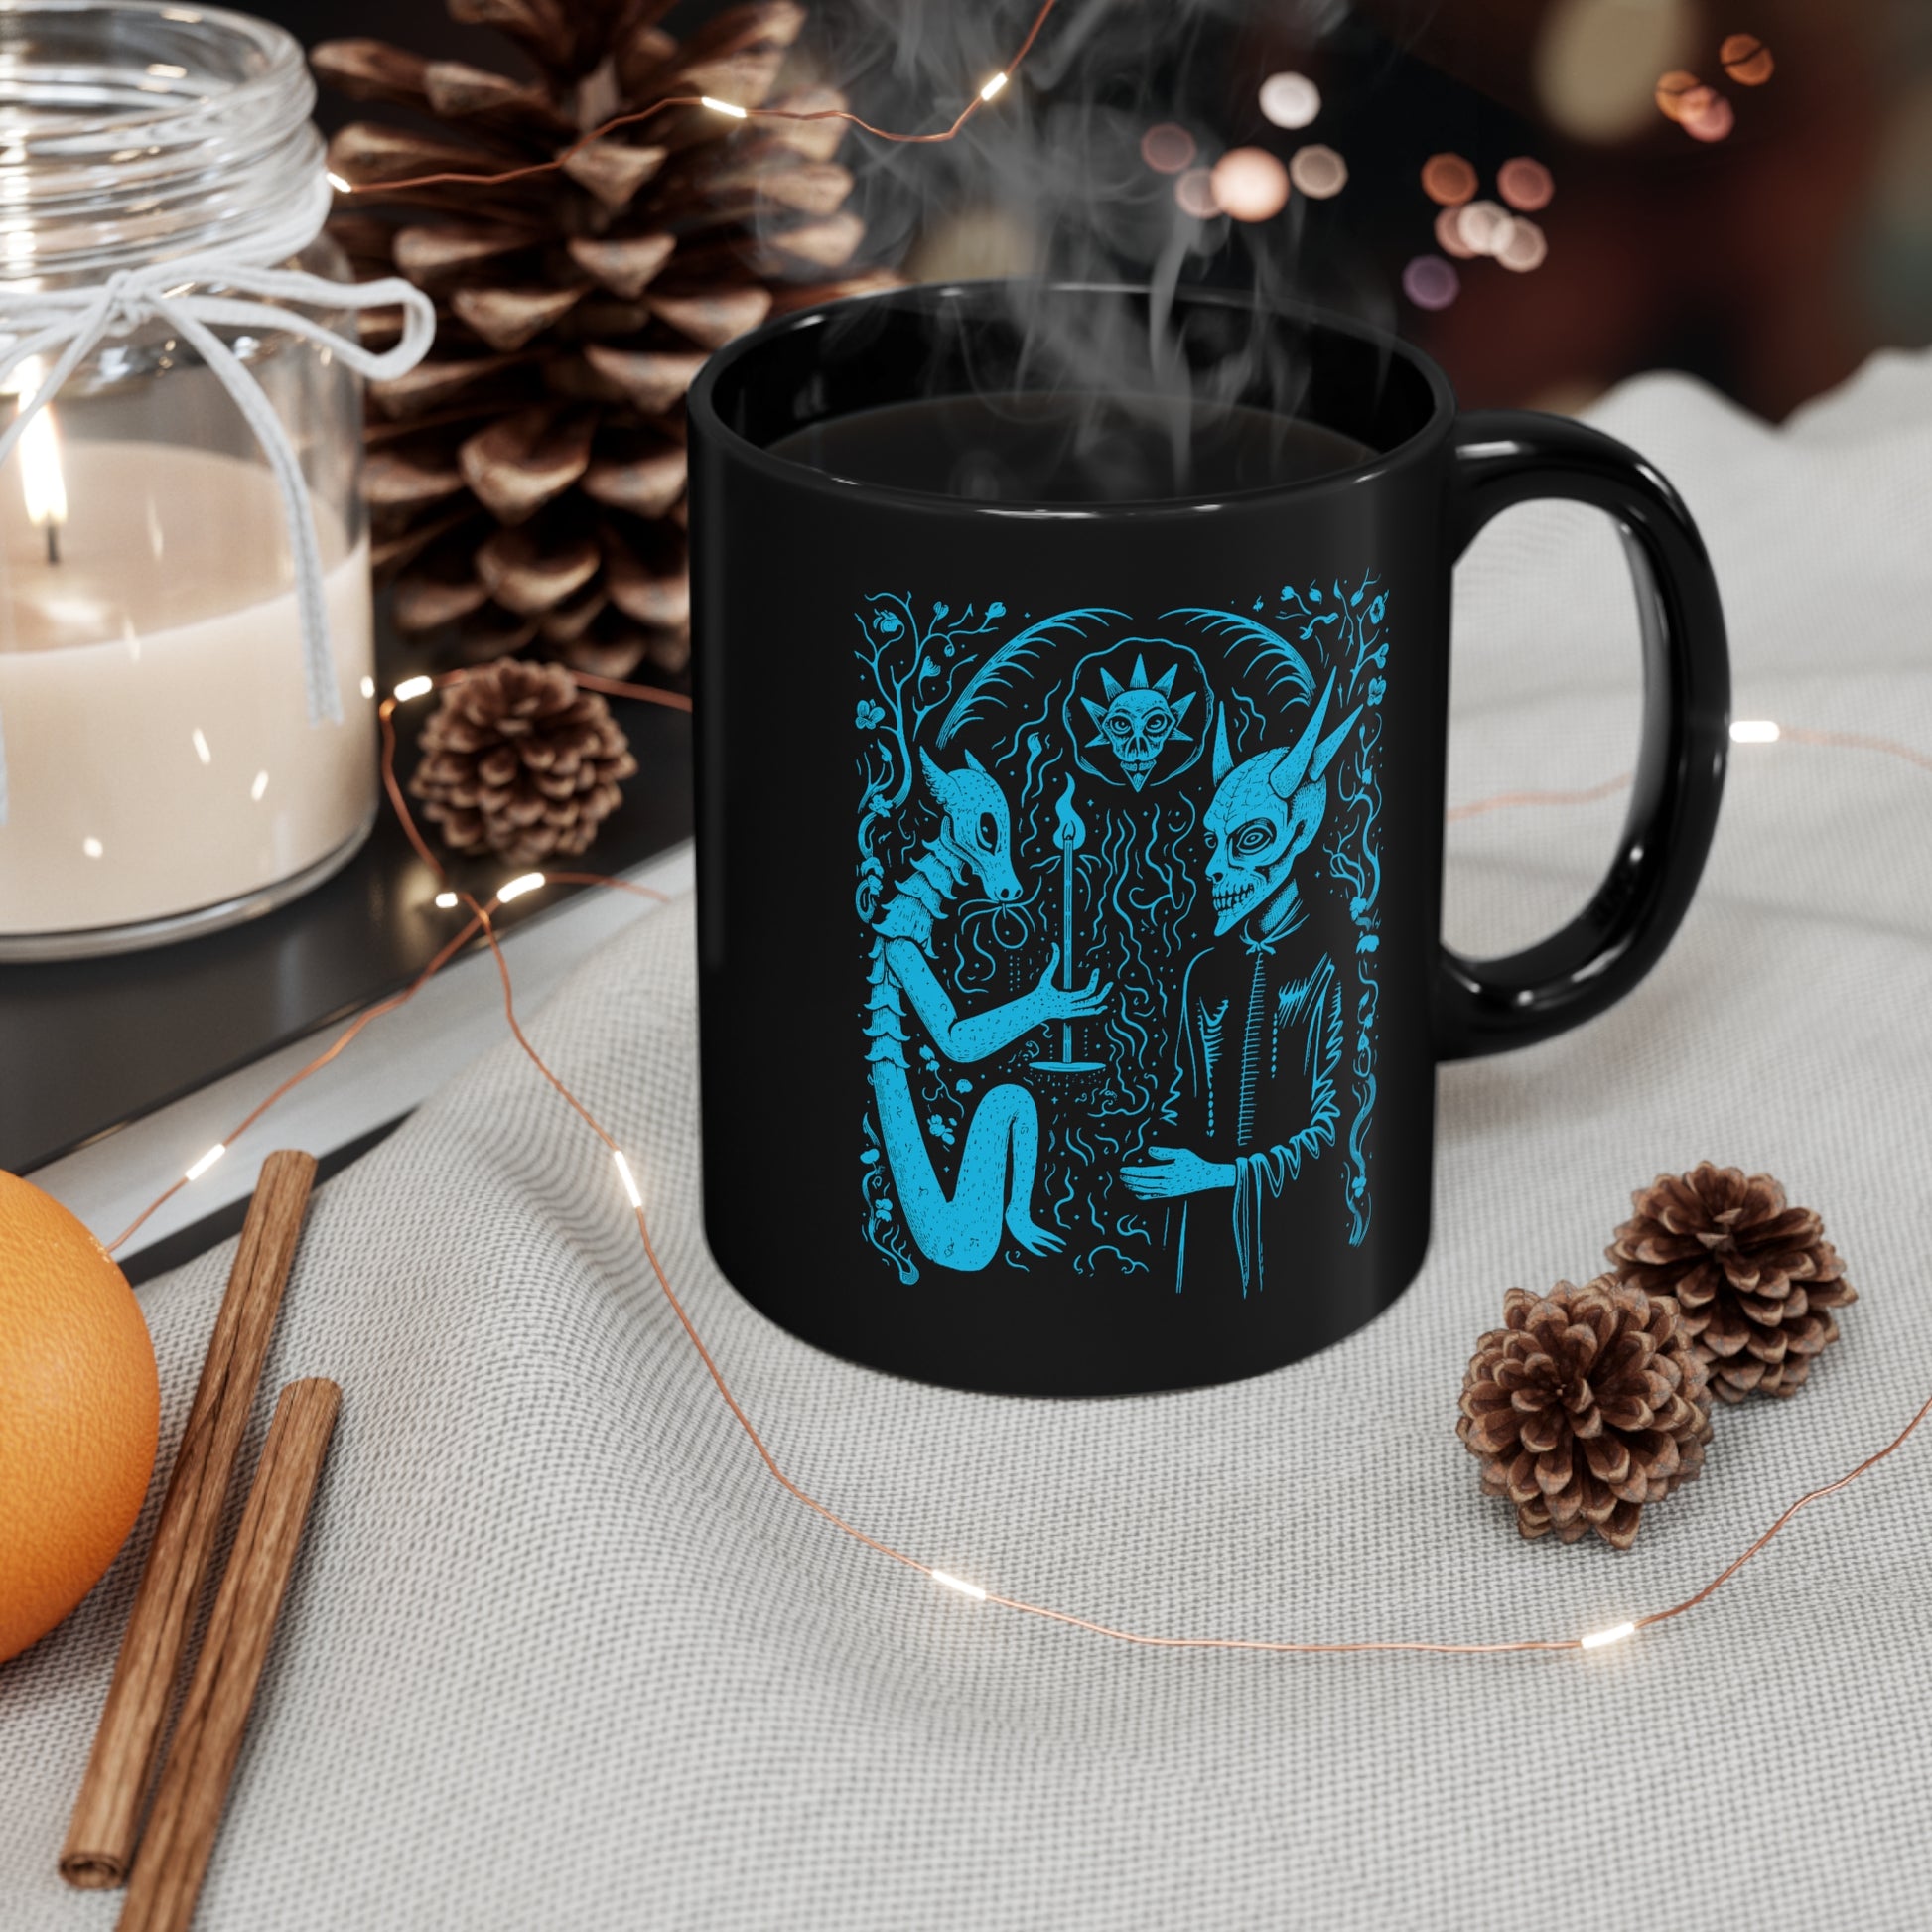 Mug Devil Pact with the Devil in Blue - Frogos Design